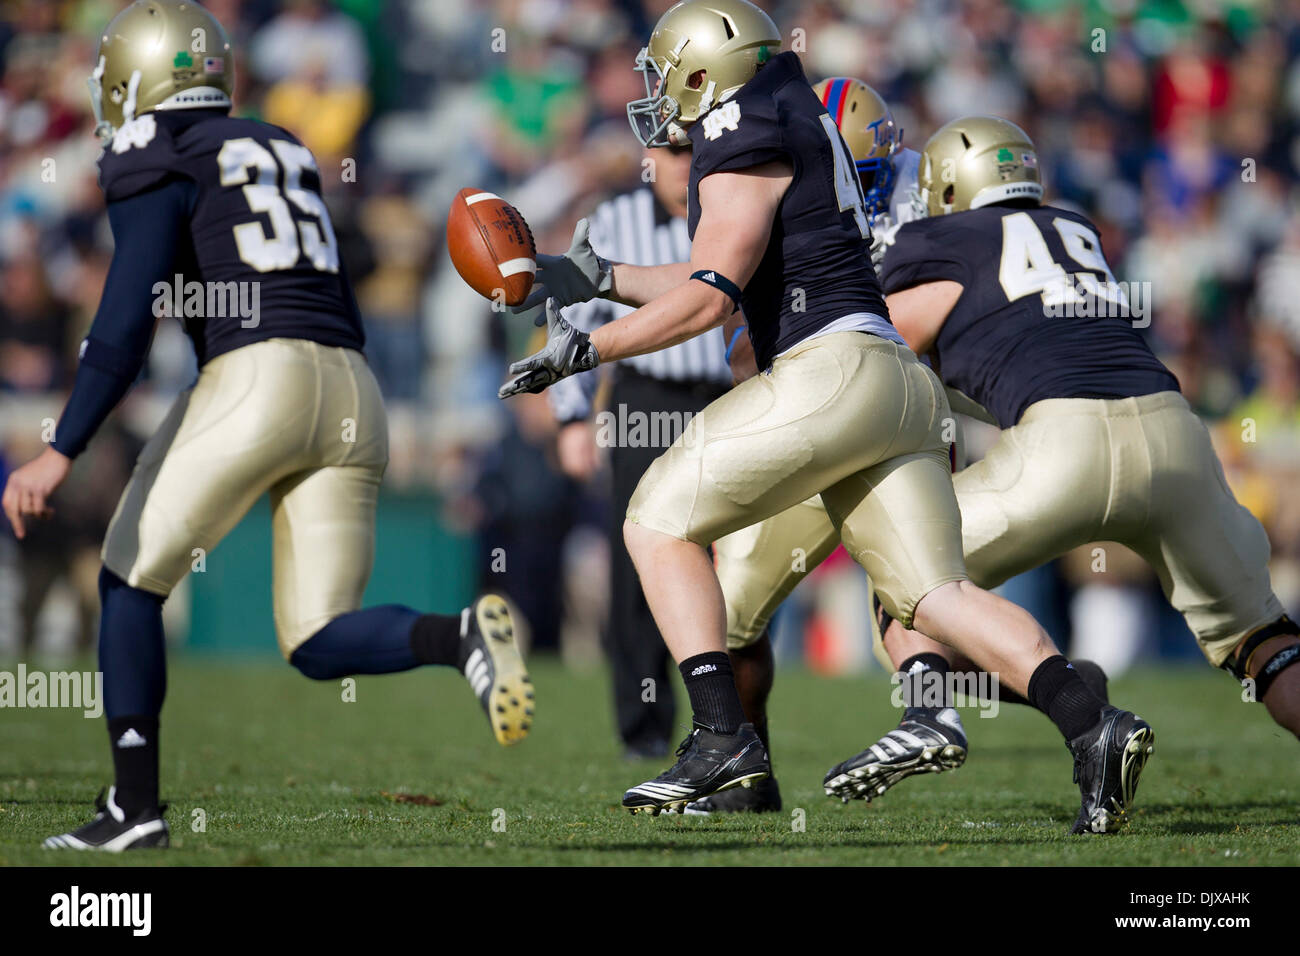 Oct. 30, 2010 - South Bend, Indiana, United States of America - Notre Dame tight end/fullback Bobby Burger (#41) grabs ball of fake punt during NCAA football game between Tulsa and Notre Dame.  The Tulsa Golden Hurricane defeated the Notre Dame Fighting Irish 28-27 in game at Notre Dame Stadium in South Bend, Indiana. (Credit Image: © John Mersits/Southcreek Global/ZUMApress.com) Stock Photo